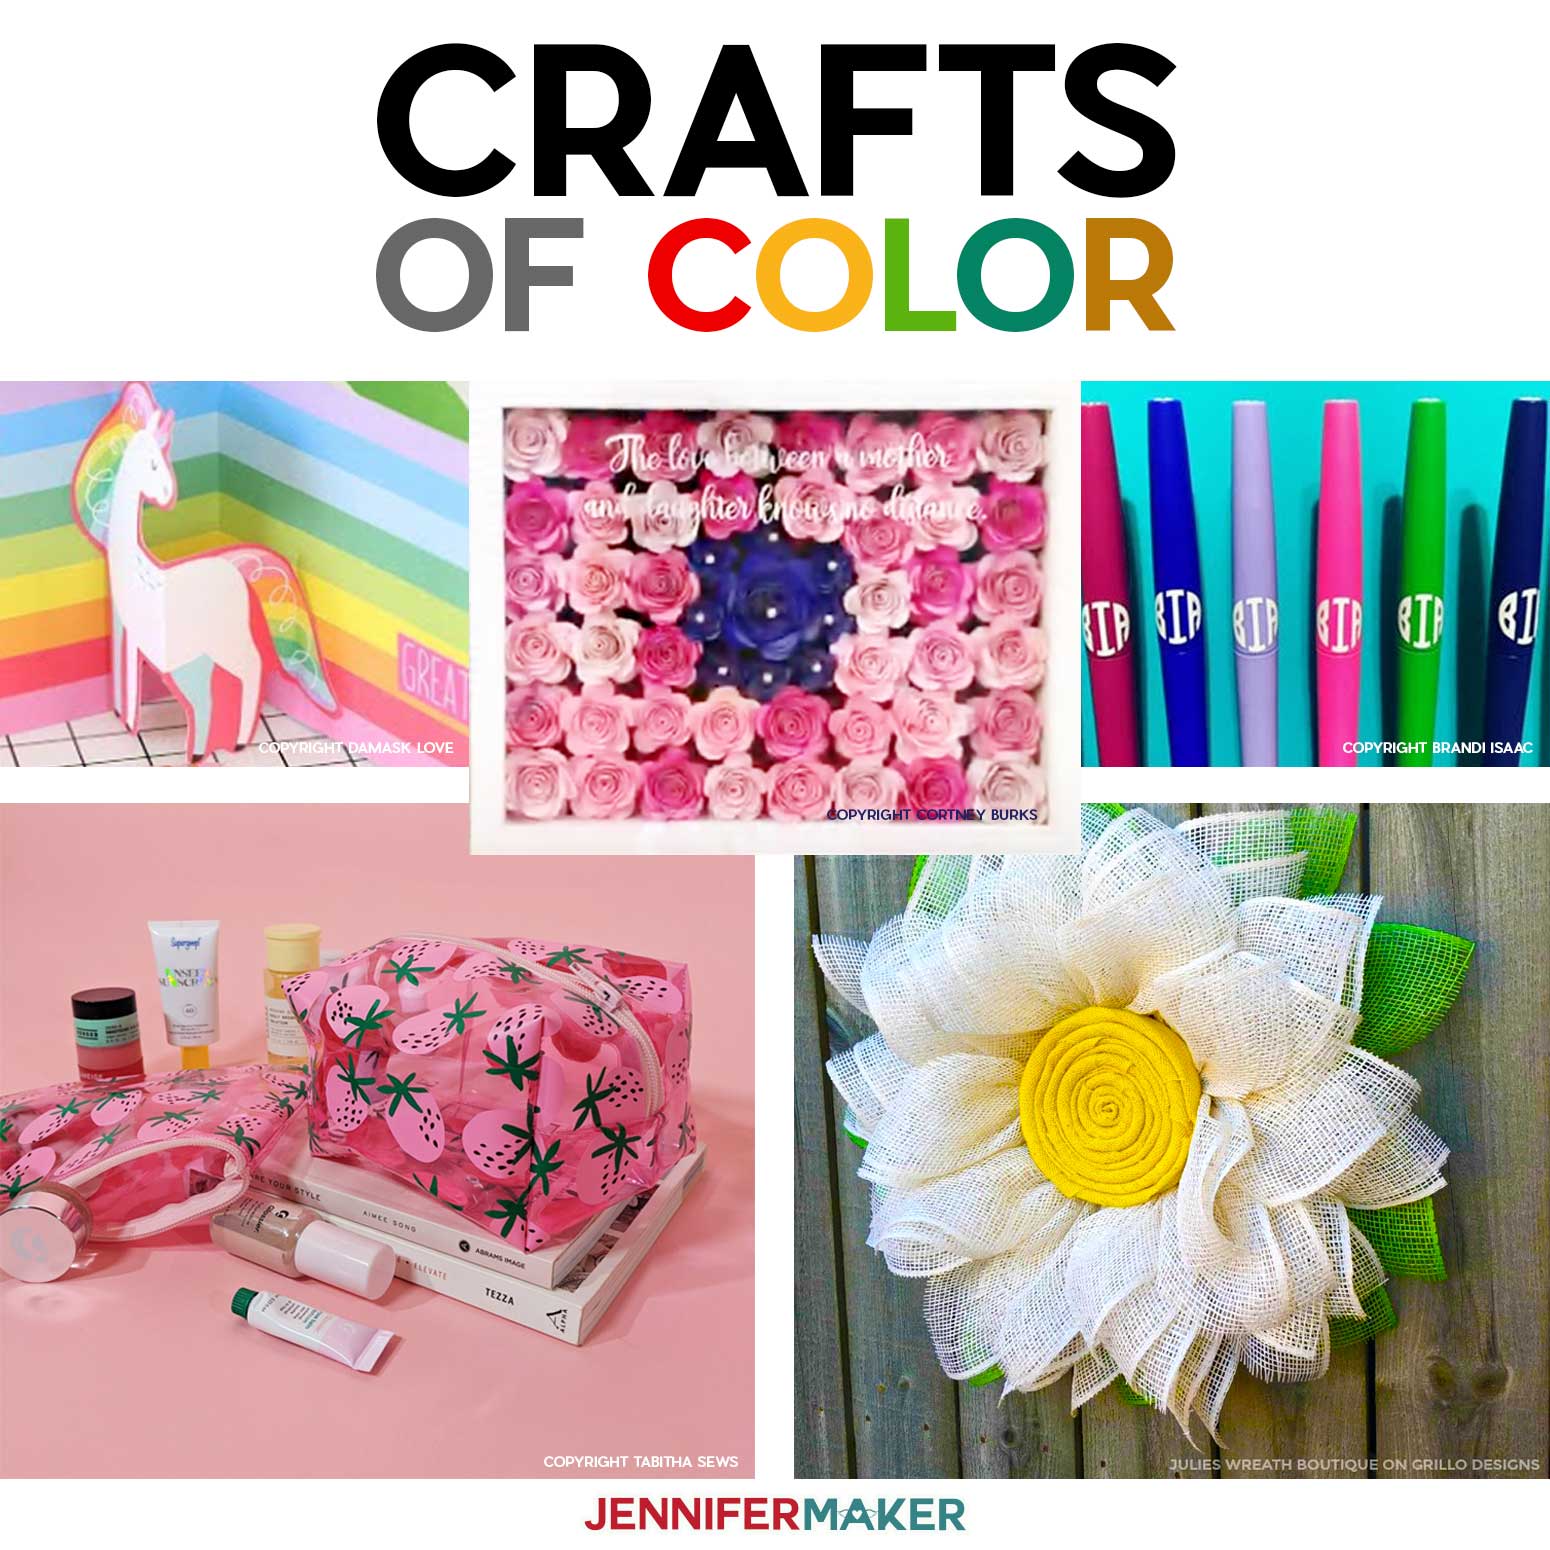 Crafts of Color: Black Crafters That Inspire & Educate!